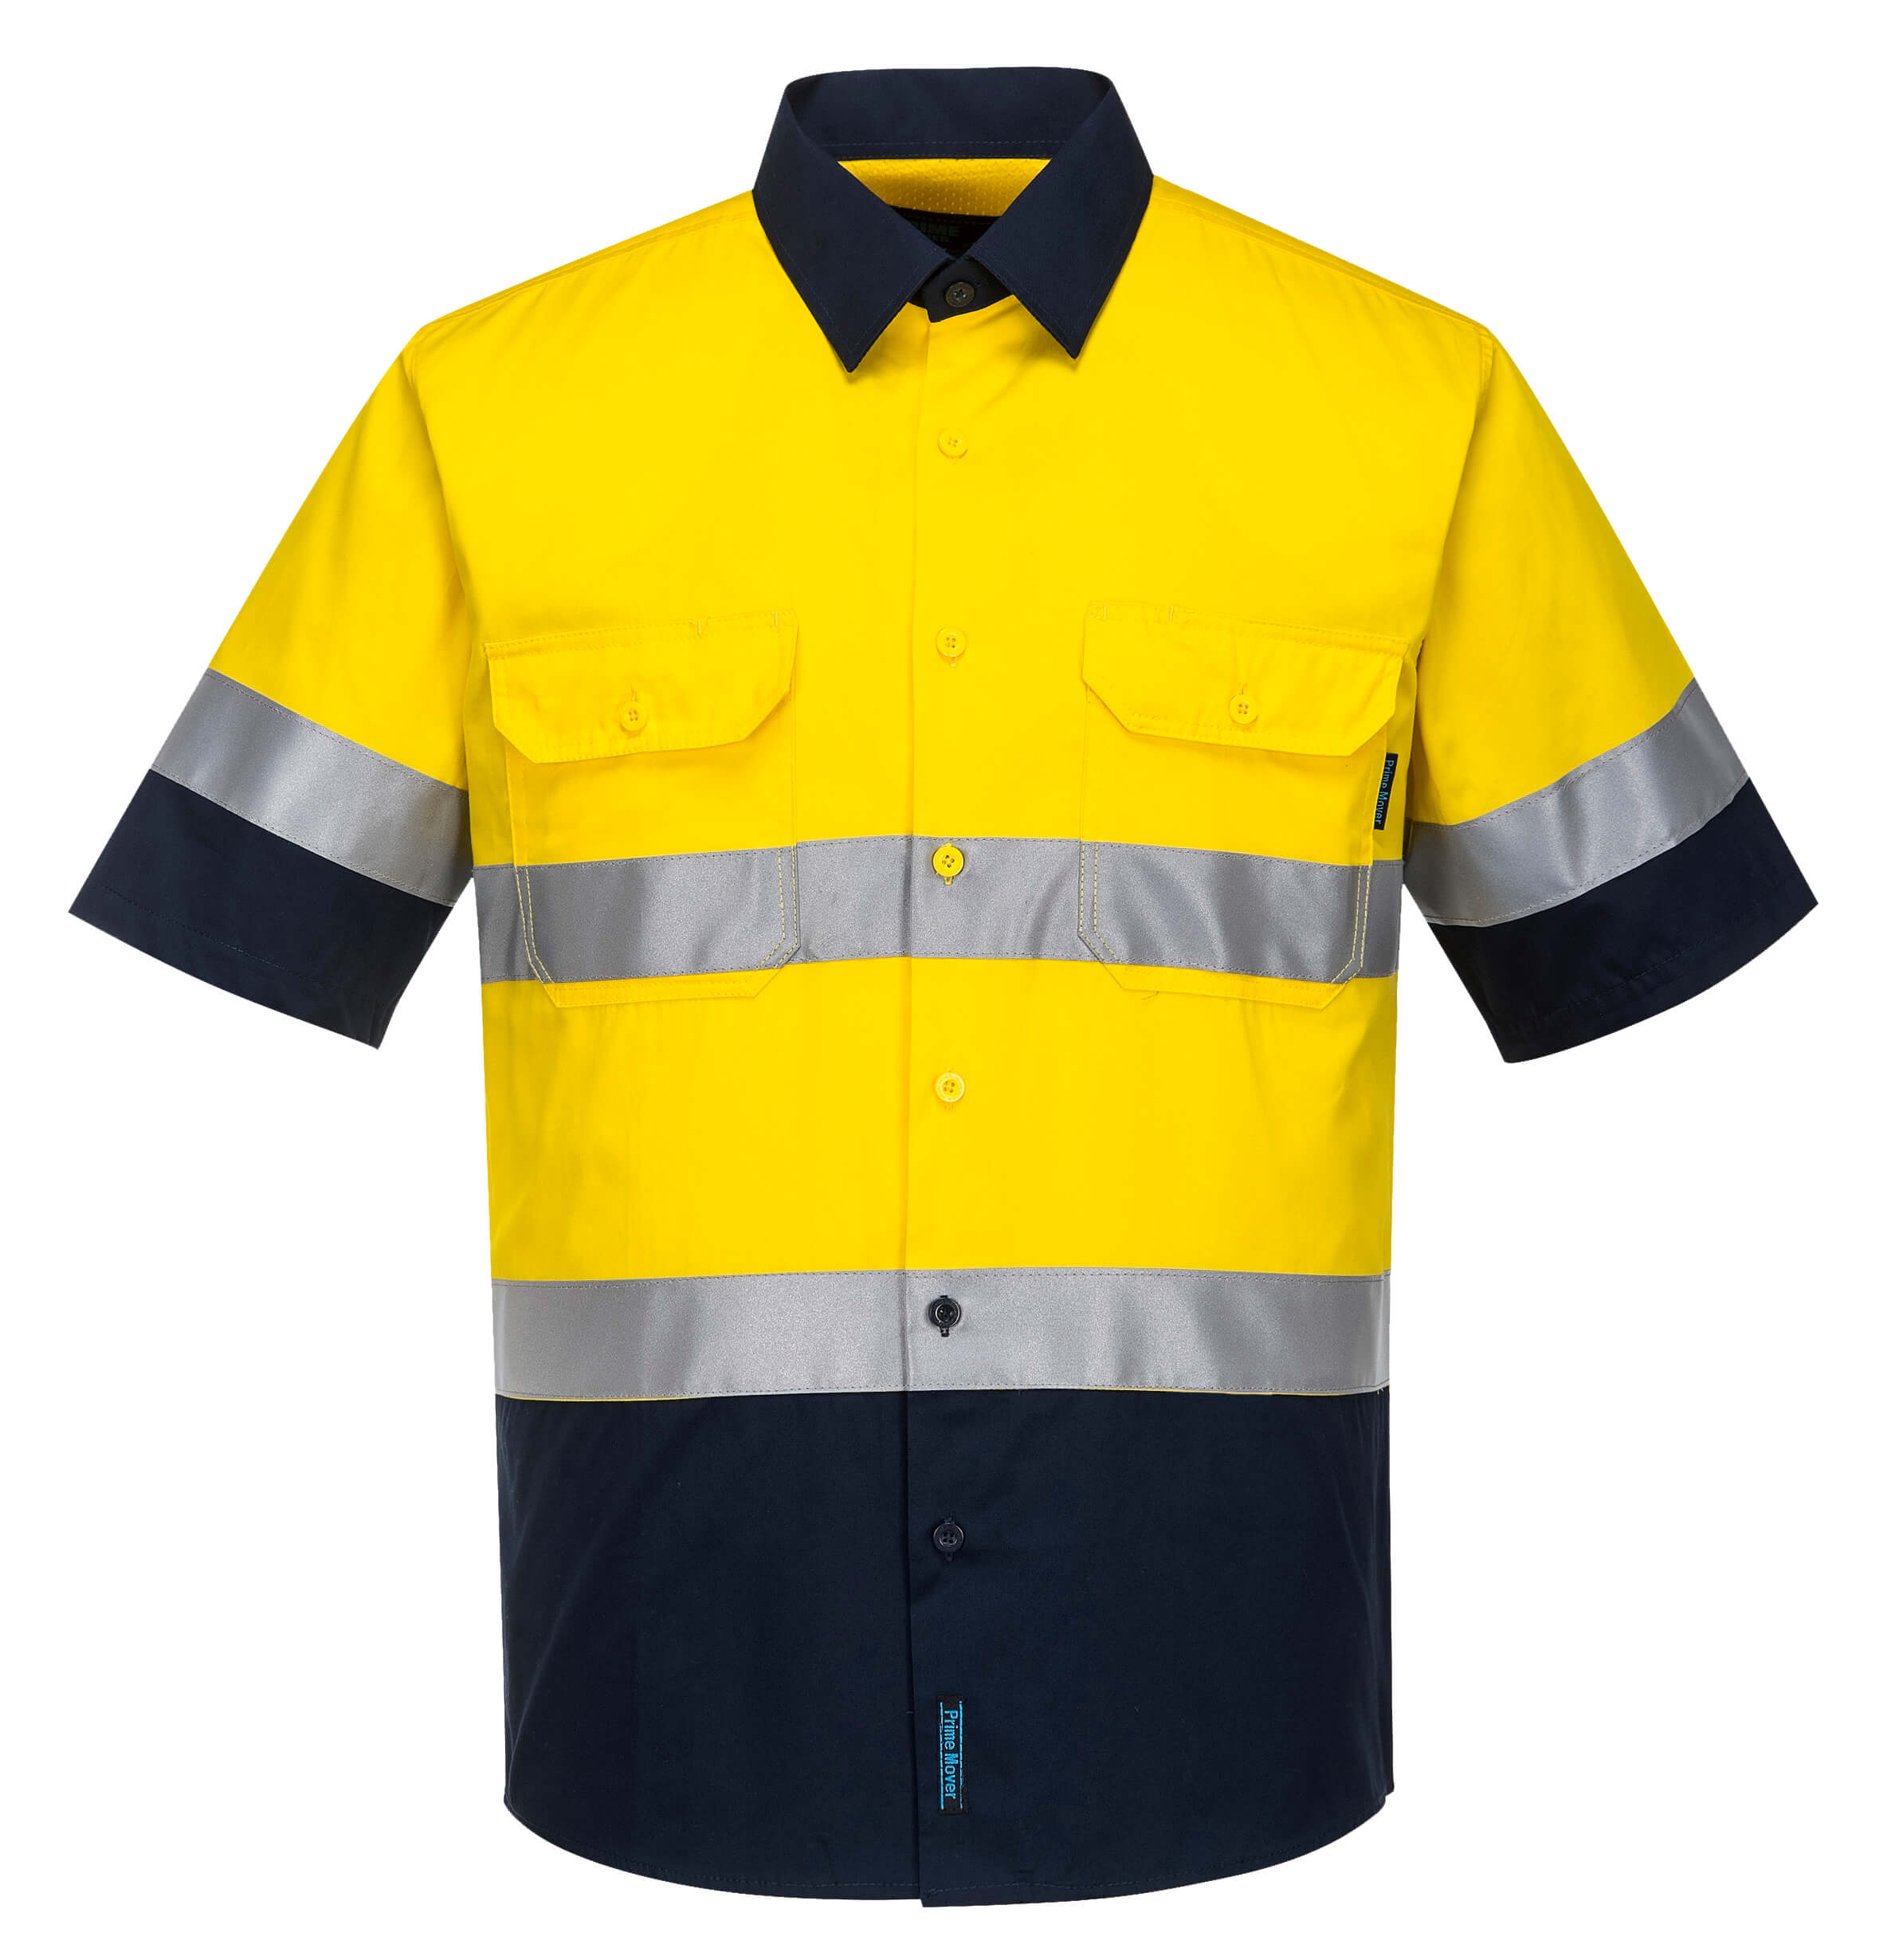 MA802 - Hi-Vis Two Tone Cotton Lightweight Short Sleeve Shirt with Tape YN